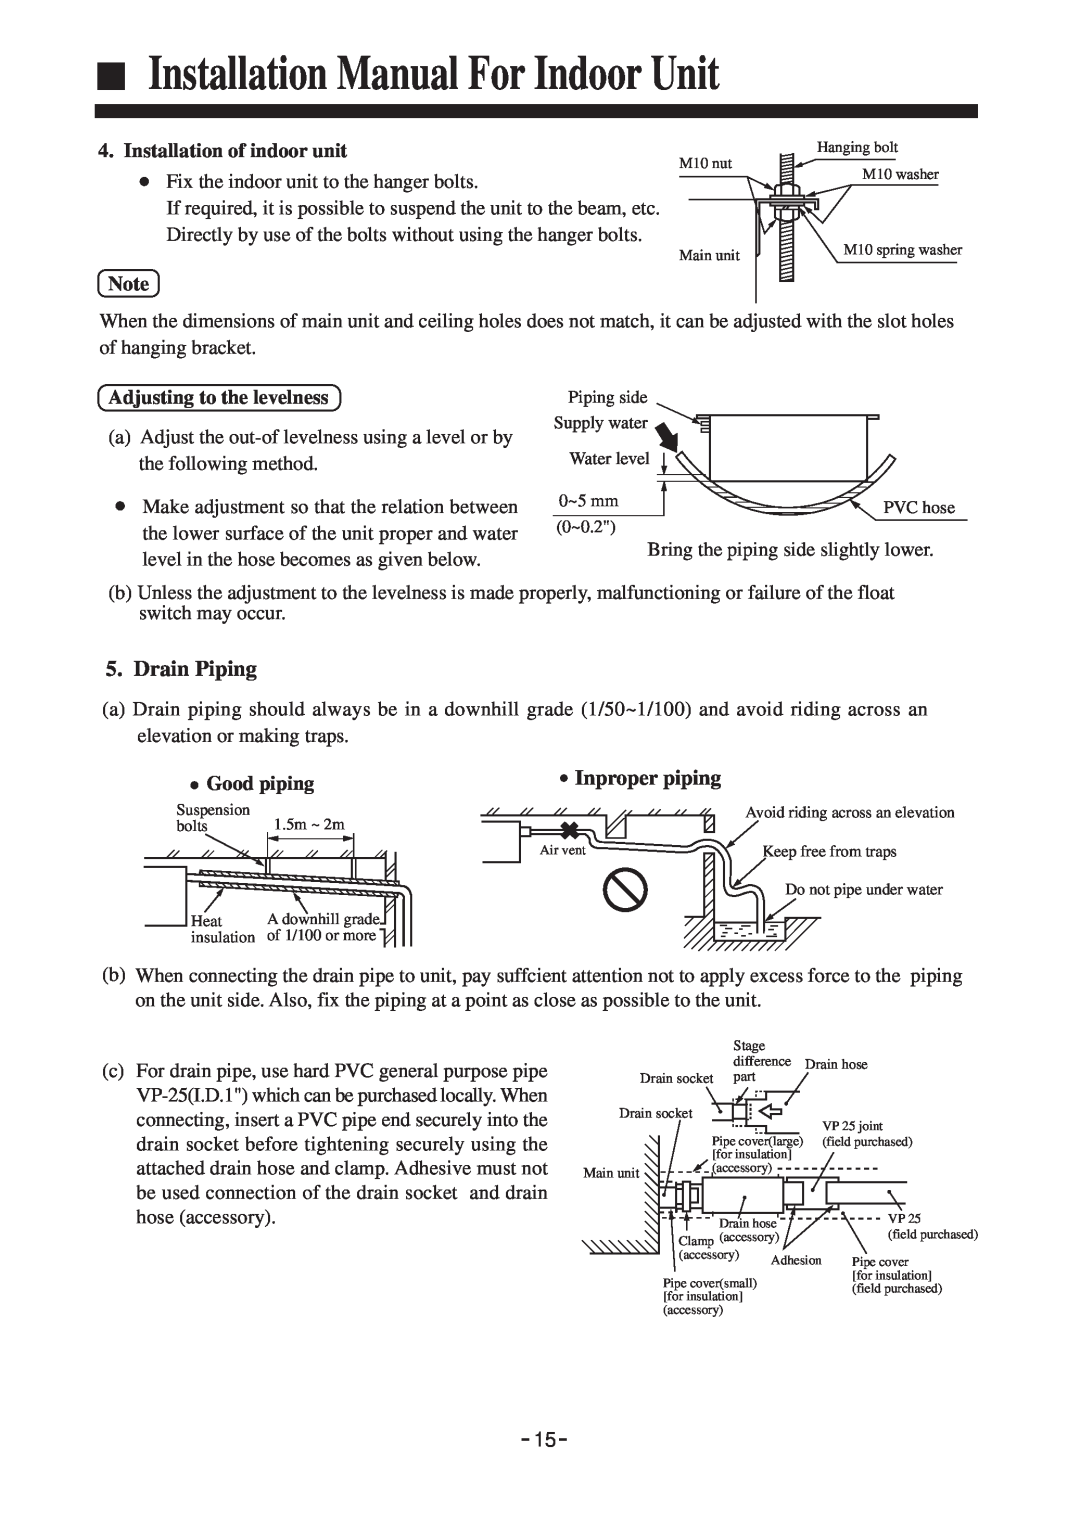 Haier AD52NAHBEA, AD242AHBEA, AD36NAHBEA, AD42NAHBEA Installation Manual For Indoor Unit, Drain Piping, Inproper piping 